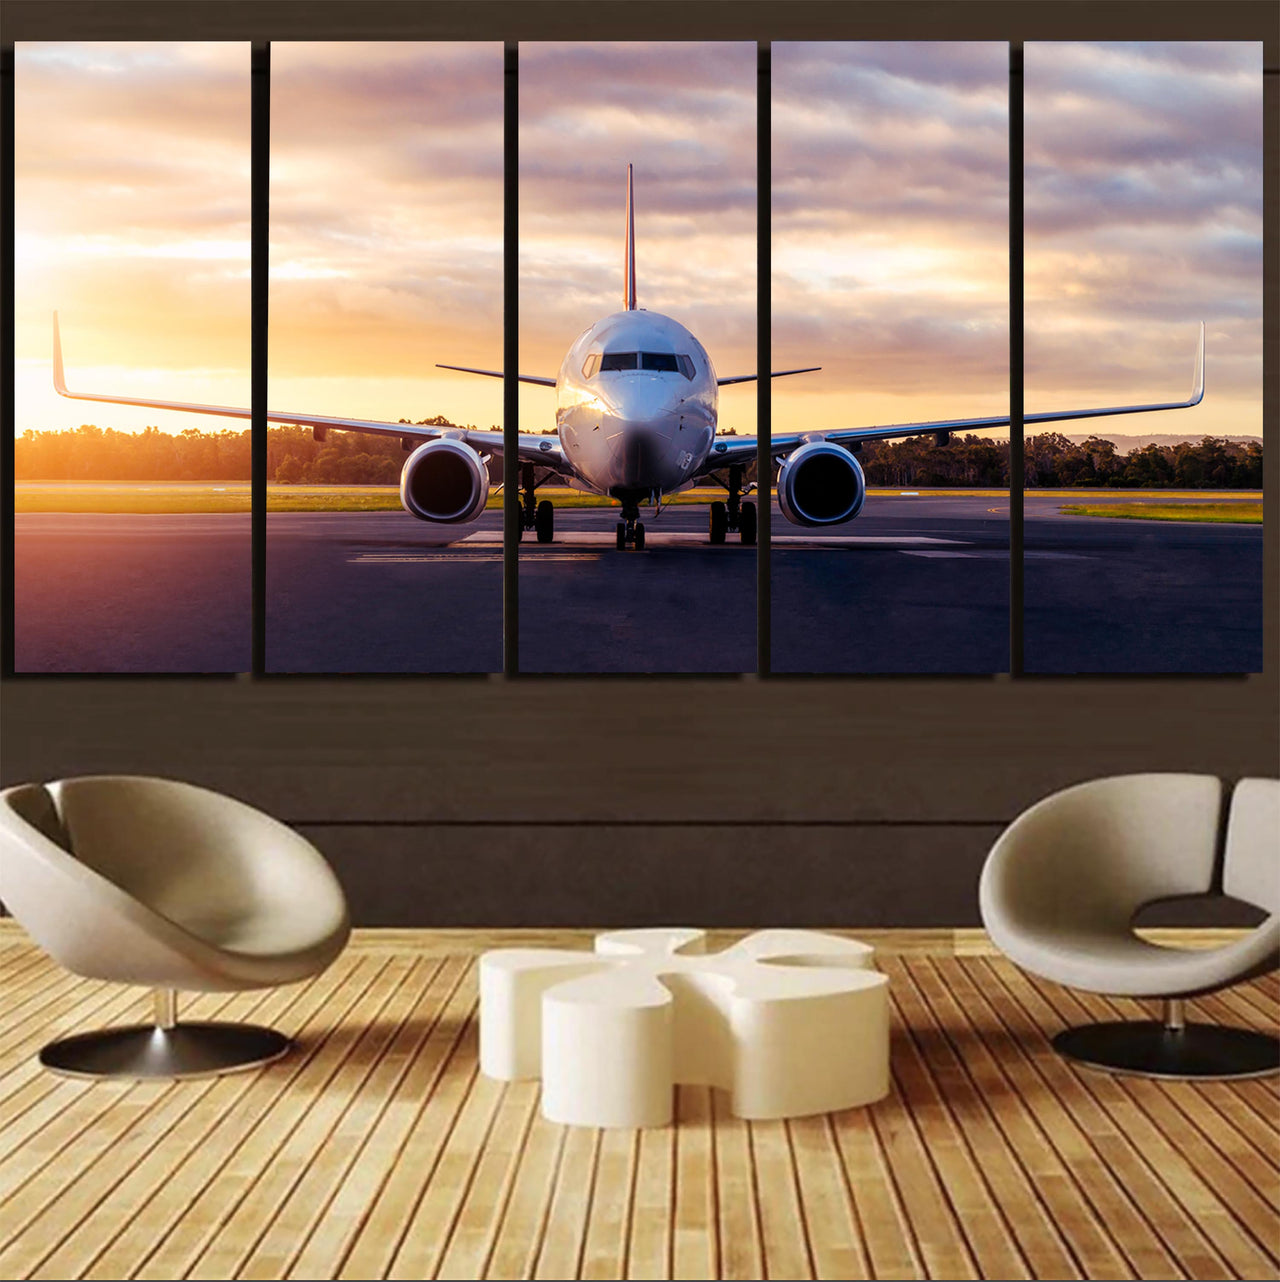 Boeing 737-800 During Sunset Printed Canvas Prints (5 Pieces)